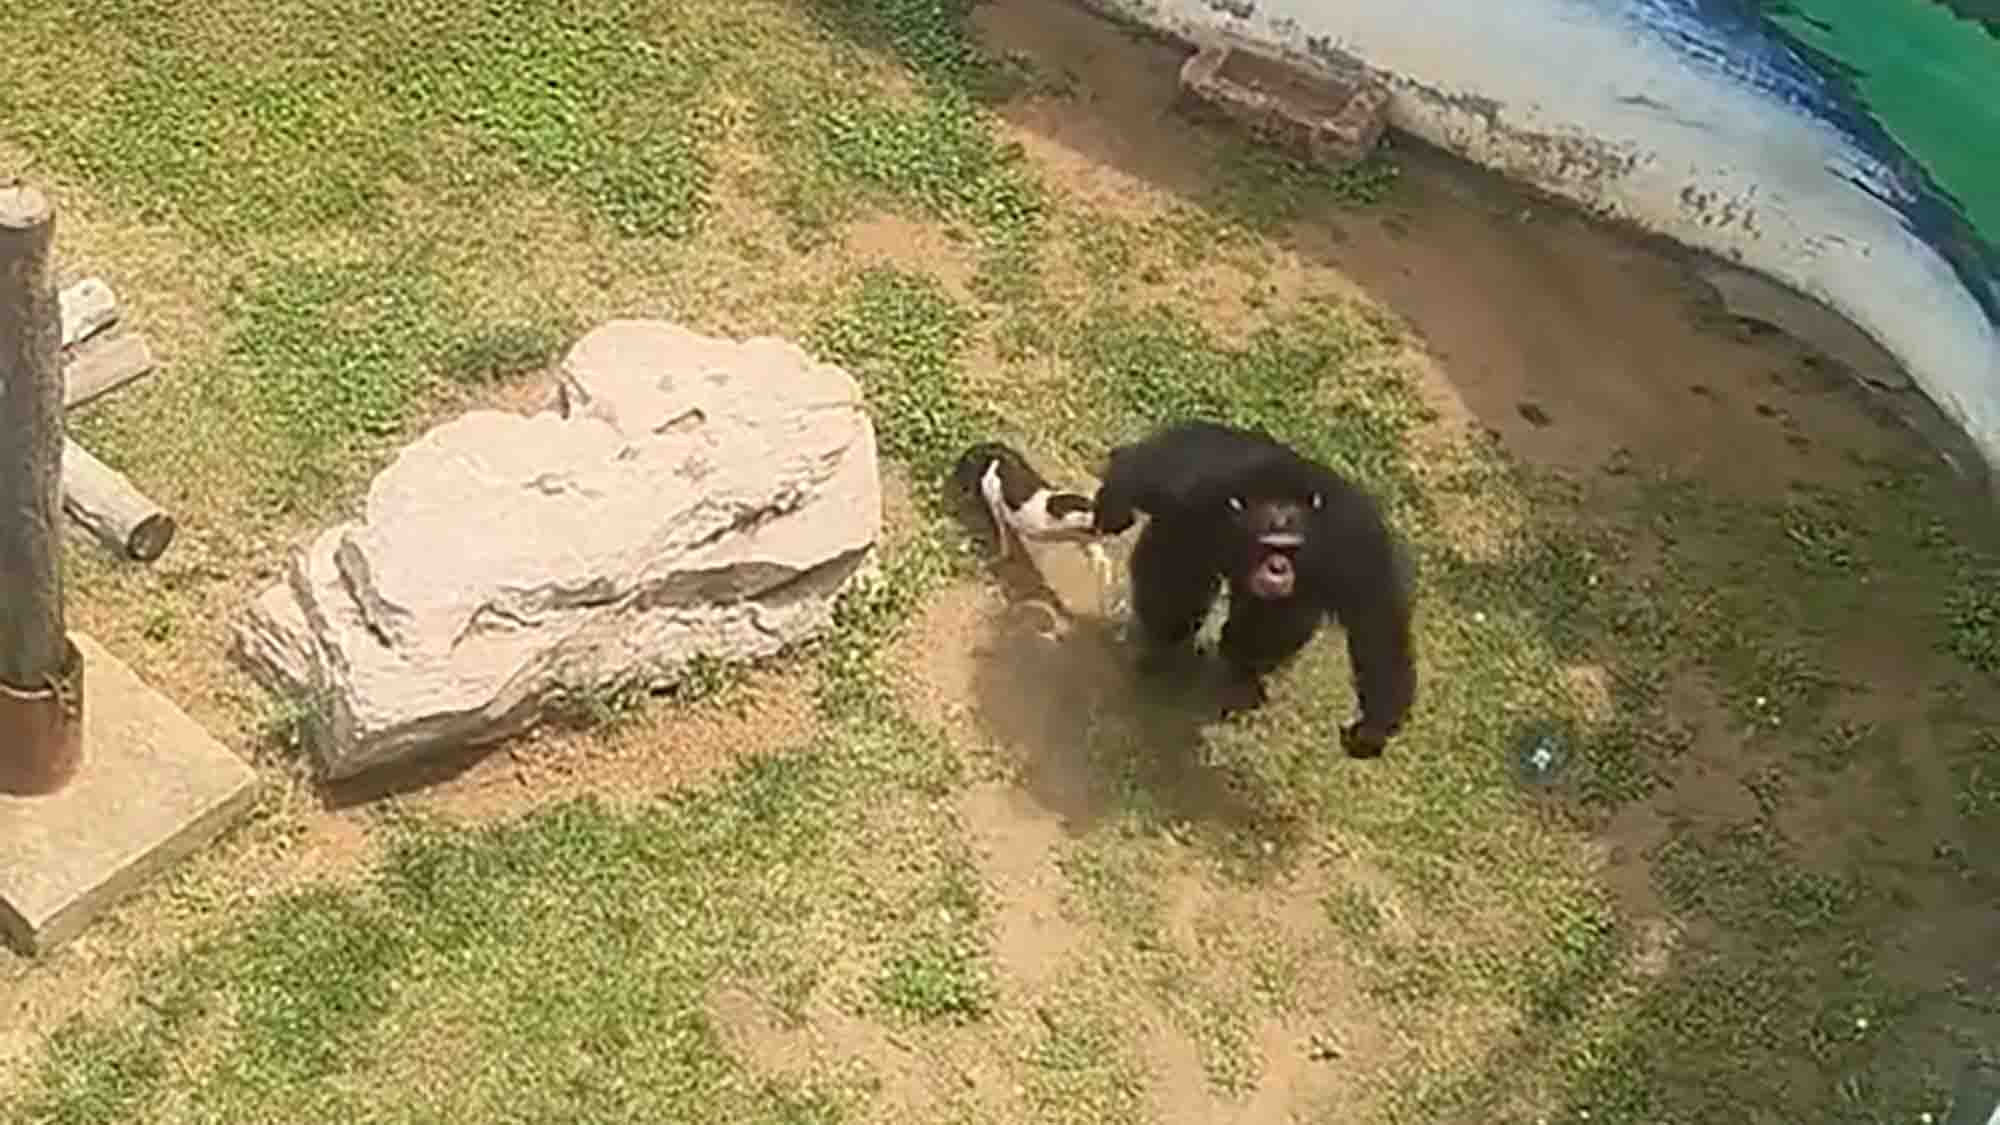 Zoo Denies Abuse After Dongdong The Gorilla Drags Squealing Piglet Around Like Rag Doll